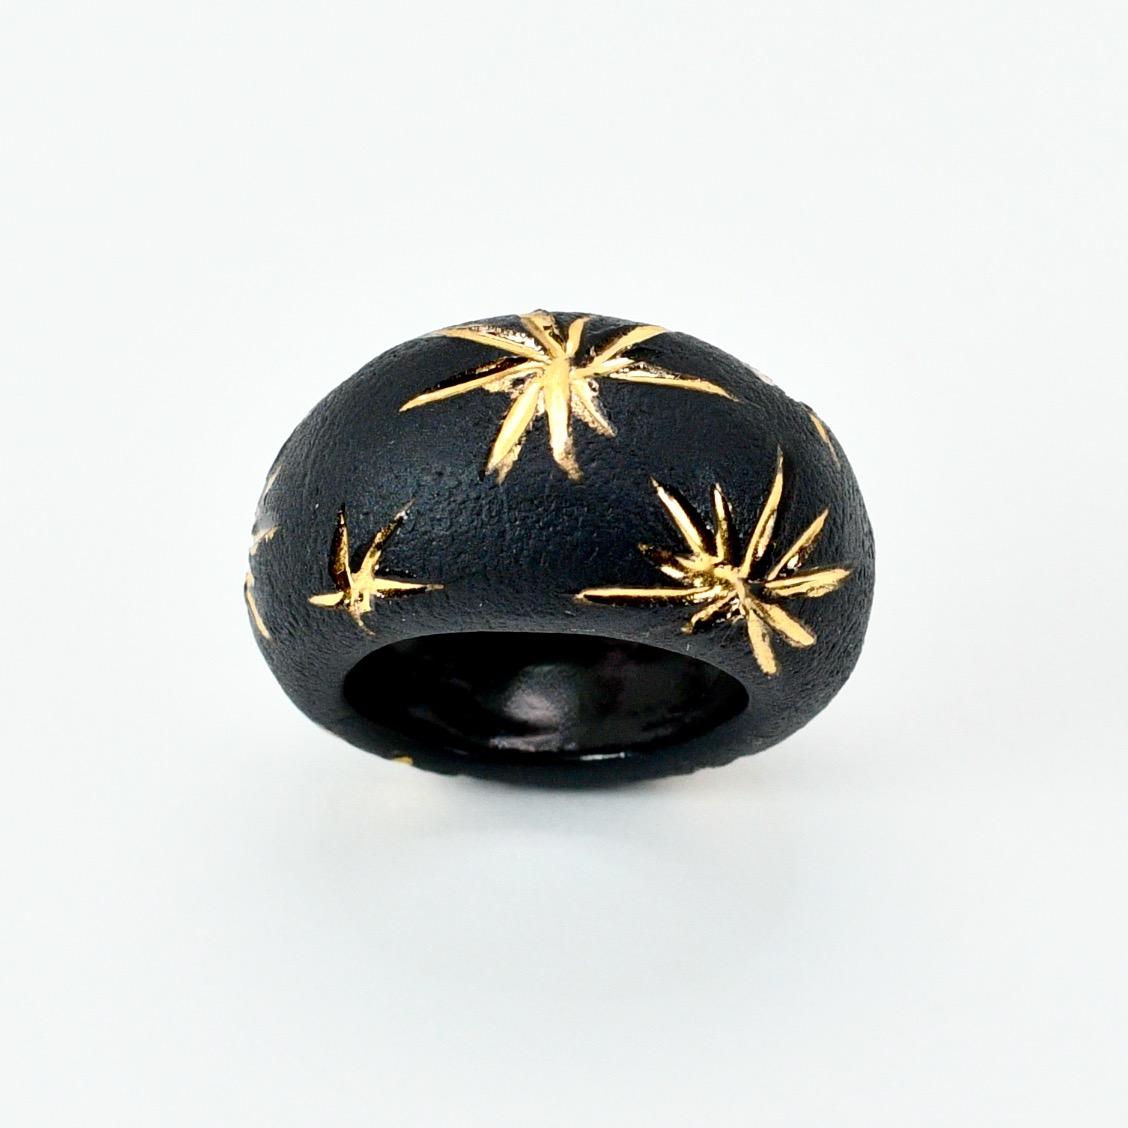 Contemporary Black Porcelain Ring with Golden Stars